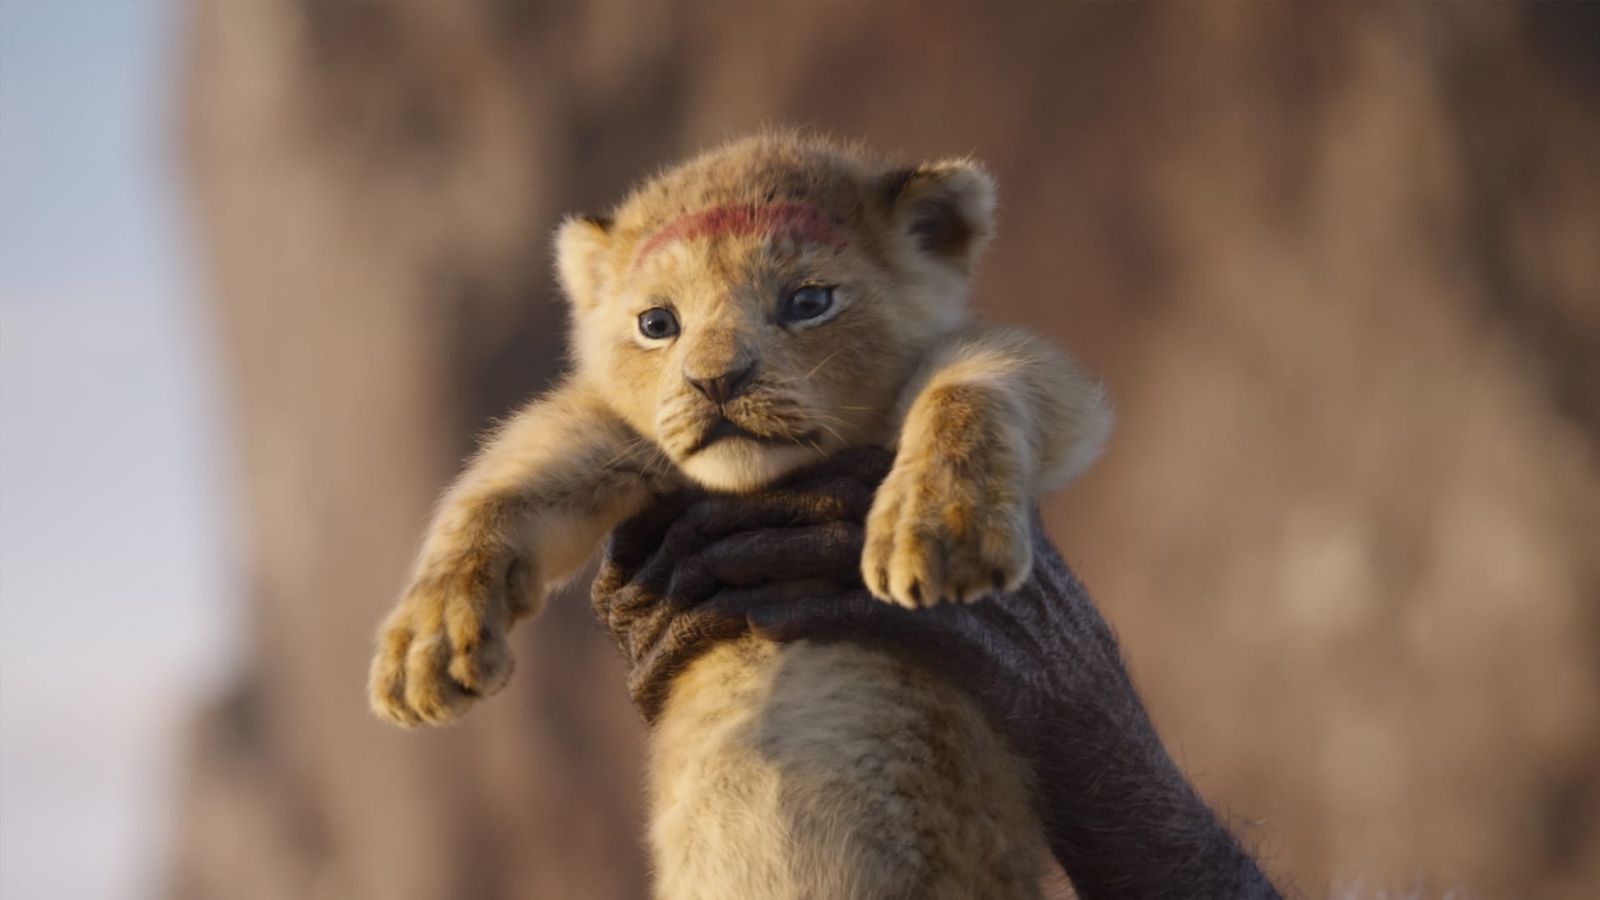 The Lion King: Check Out What Critics Are Saying About The Live Action Remake of The Iconic Animated Movie